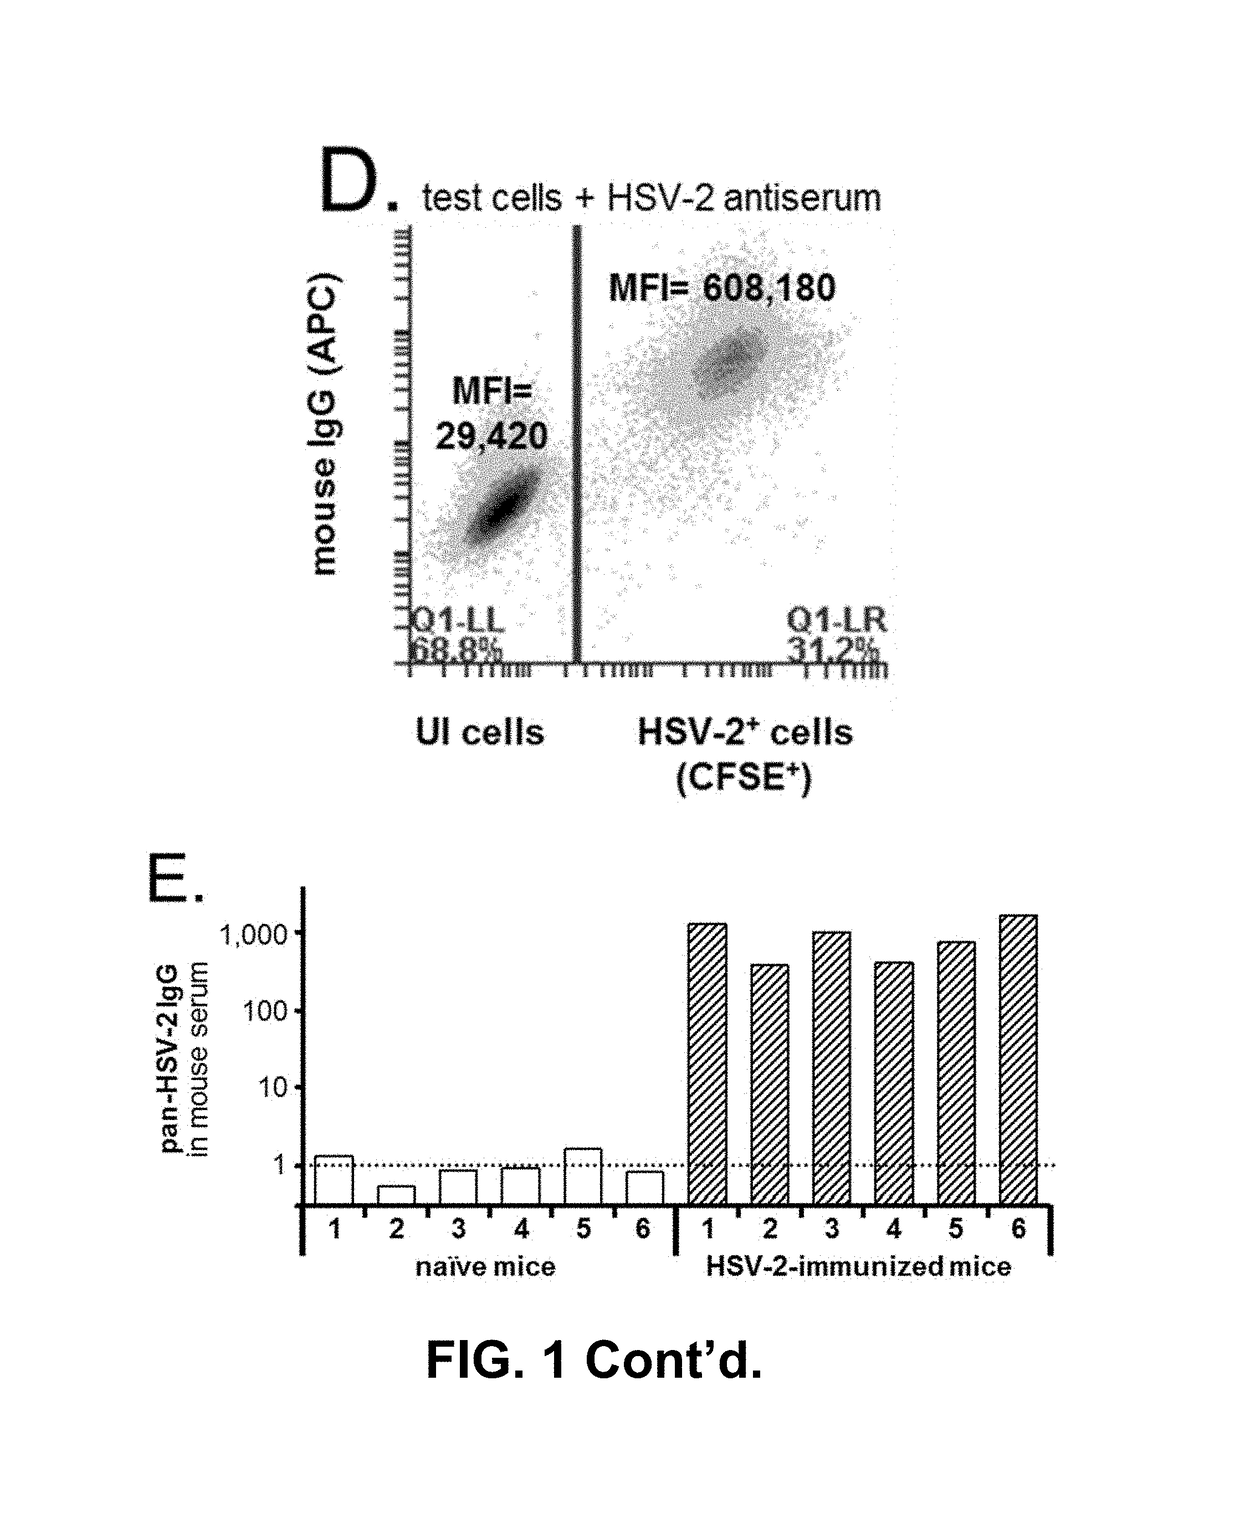 Rapid and sensitive serological assay to determine if patients are infected with herpes simplex virus type 1 HSV-1 and/or type 2 HSV-2